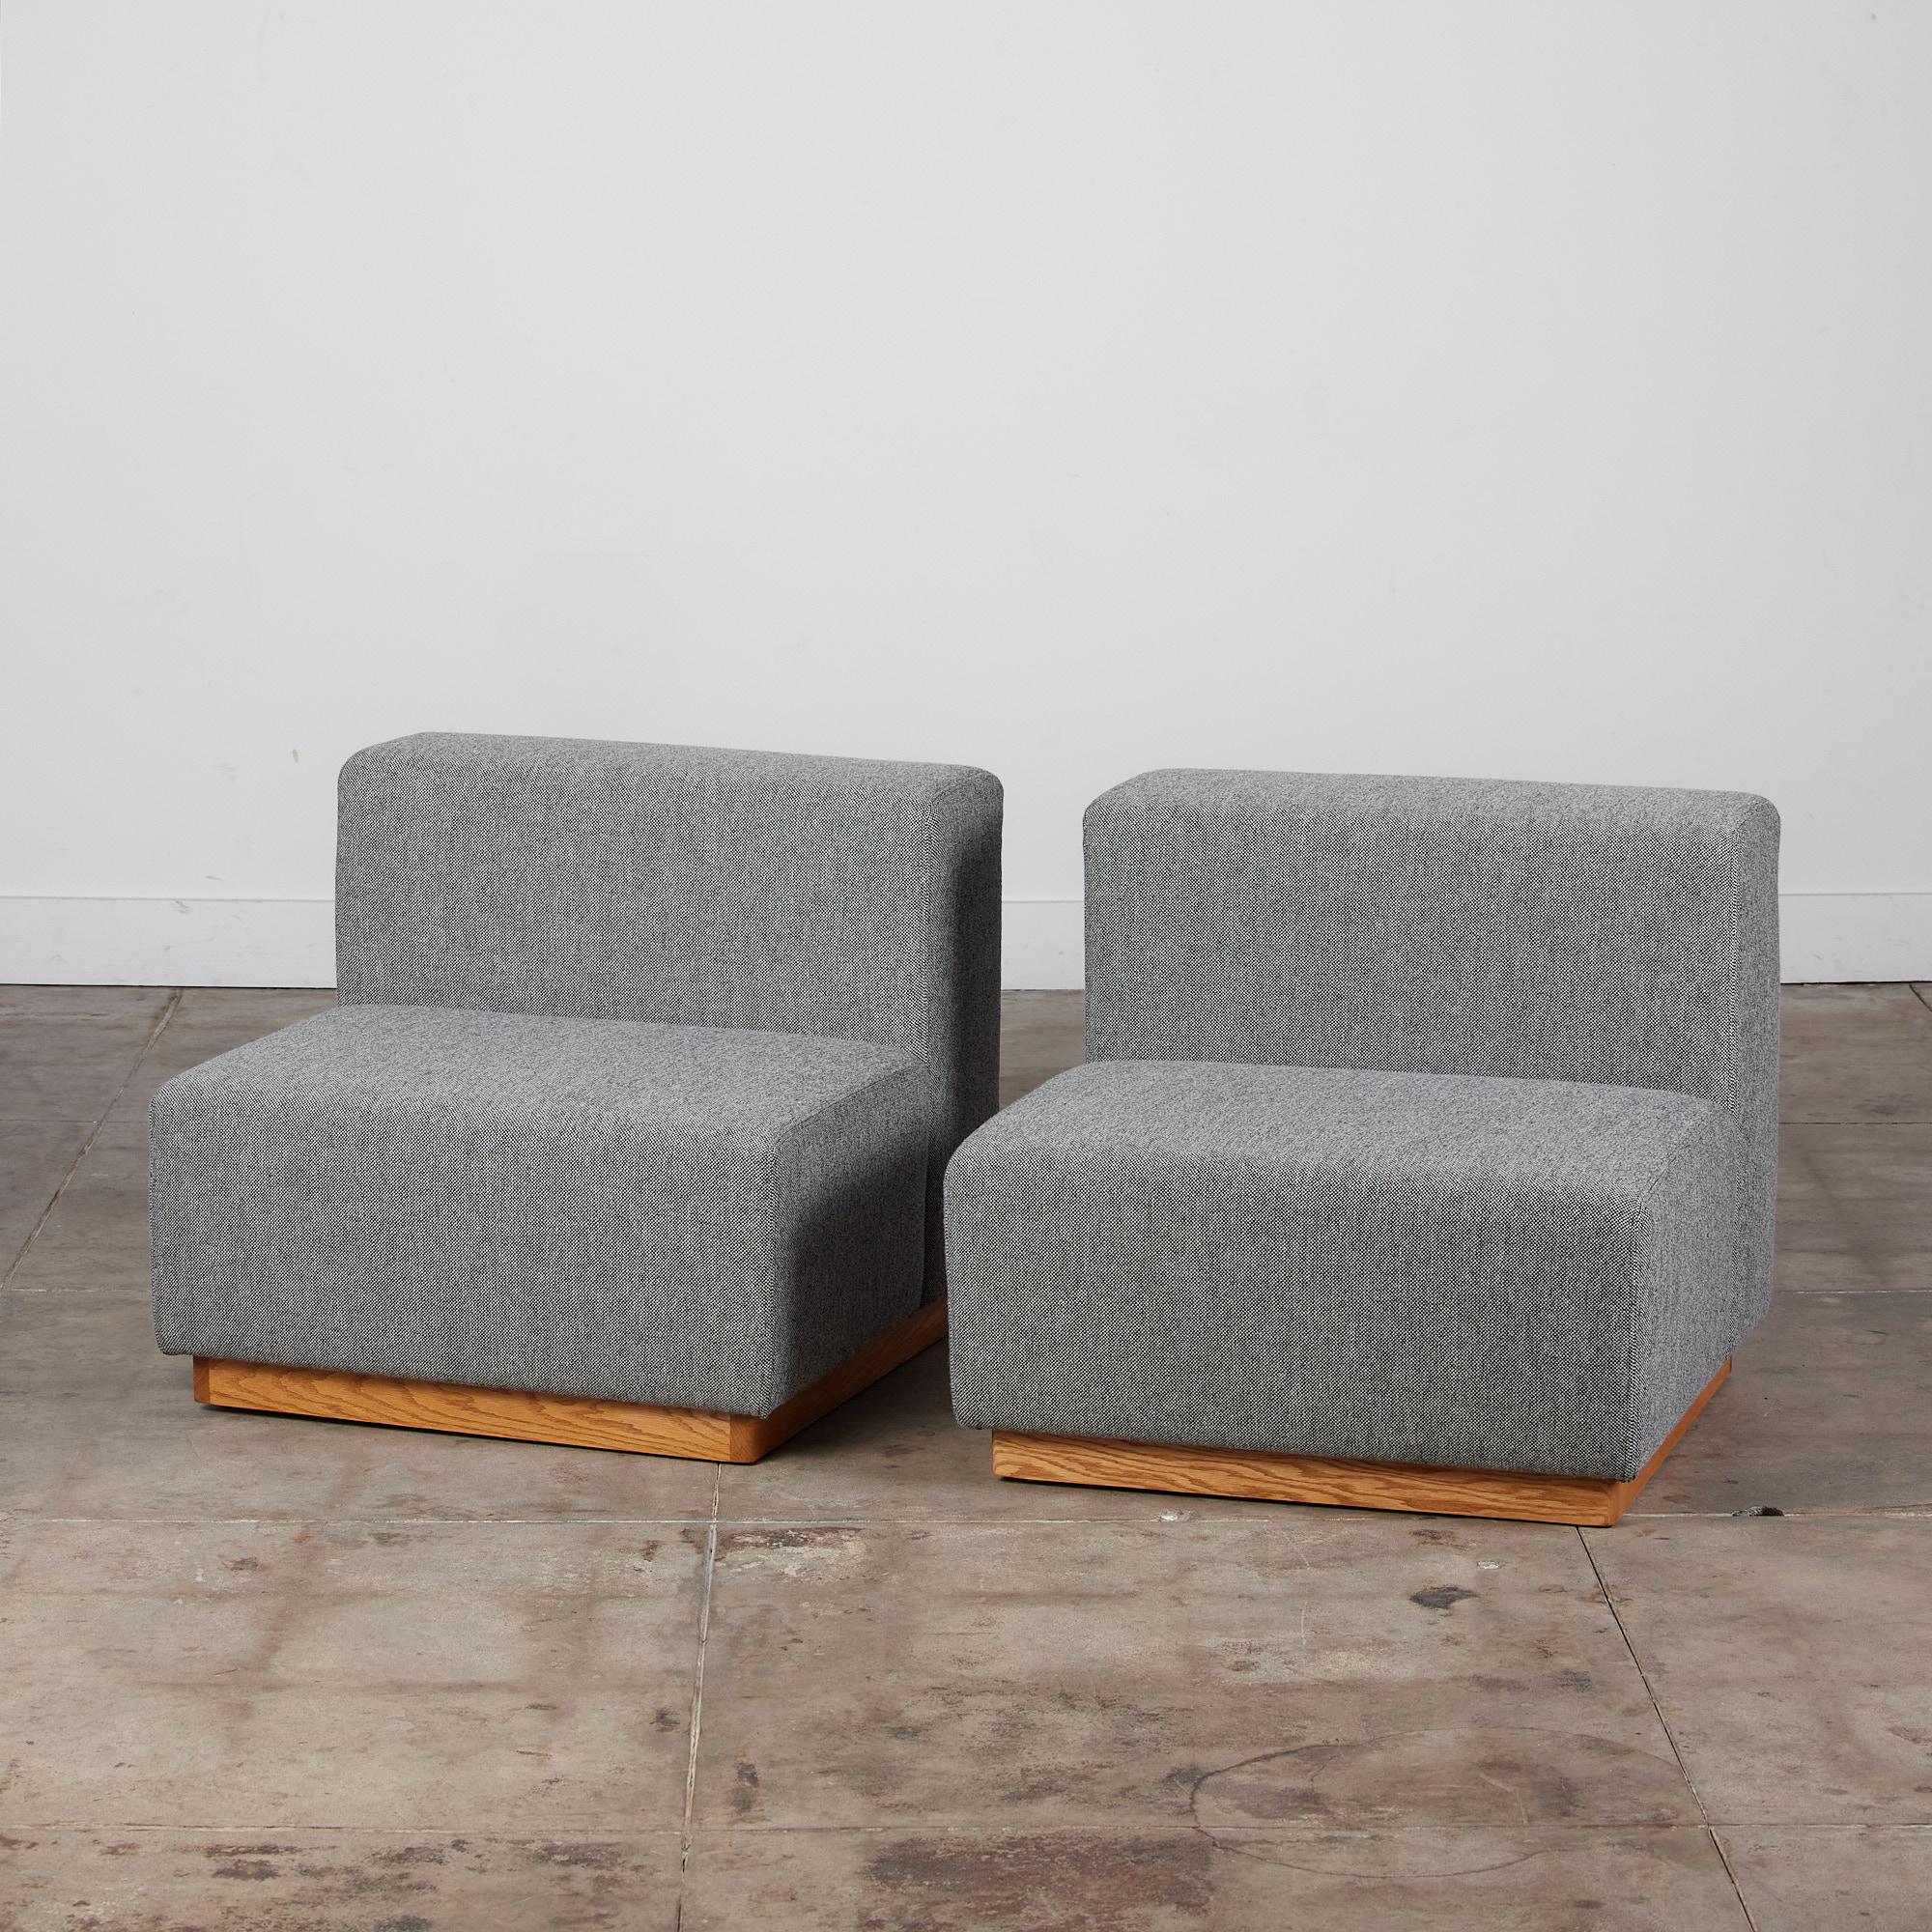 Pair of modern cubic sofa seats in the style of Giancarlo Piretti. This seats have been newly upholstered in Kvadrat fabric and feature two modular seats with clean geometric lines. The seats sit atop an oak plinth base. These semi modular sofa